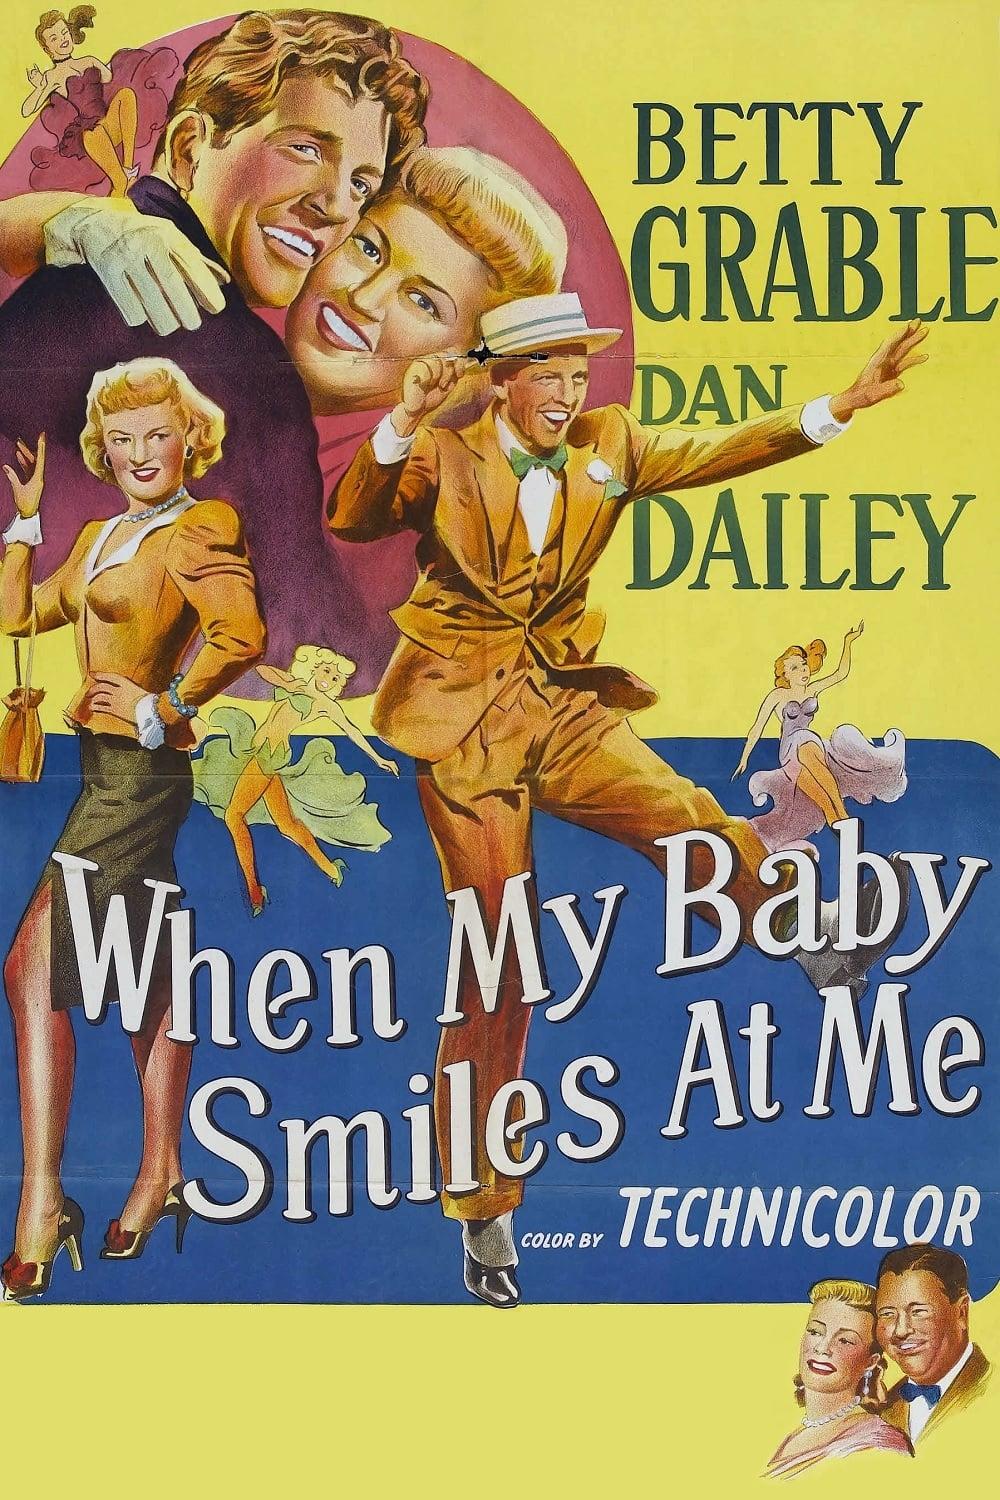 When My Baby Smiles at Me poster